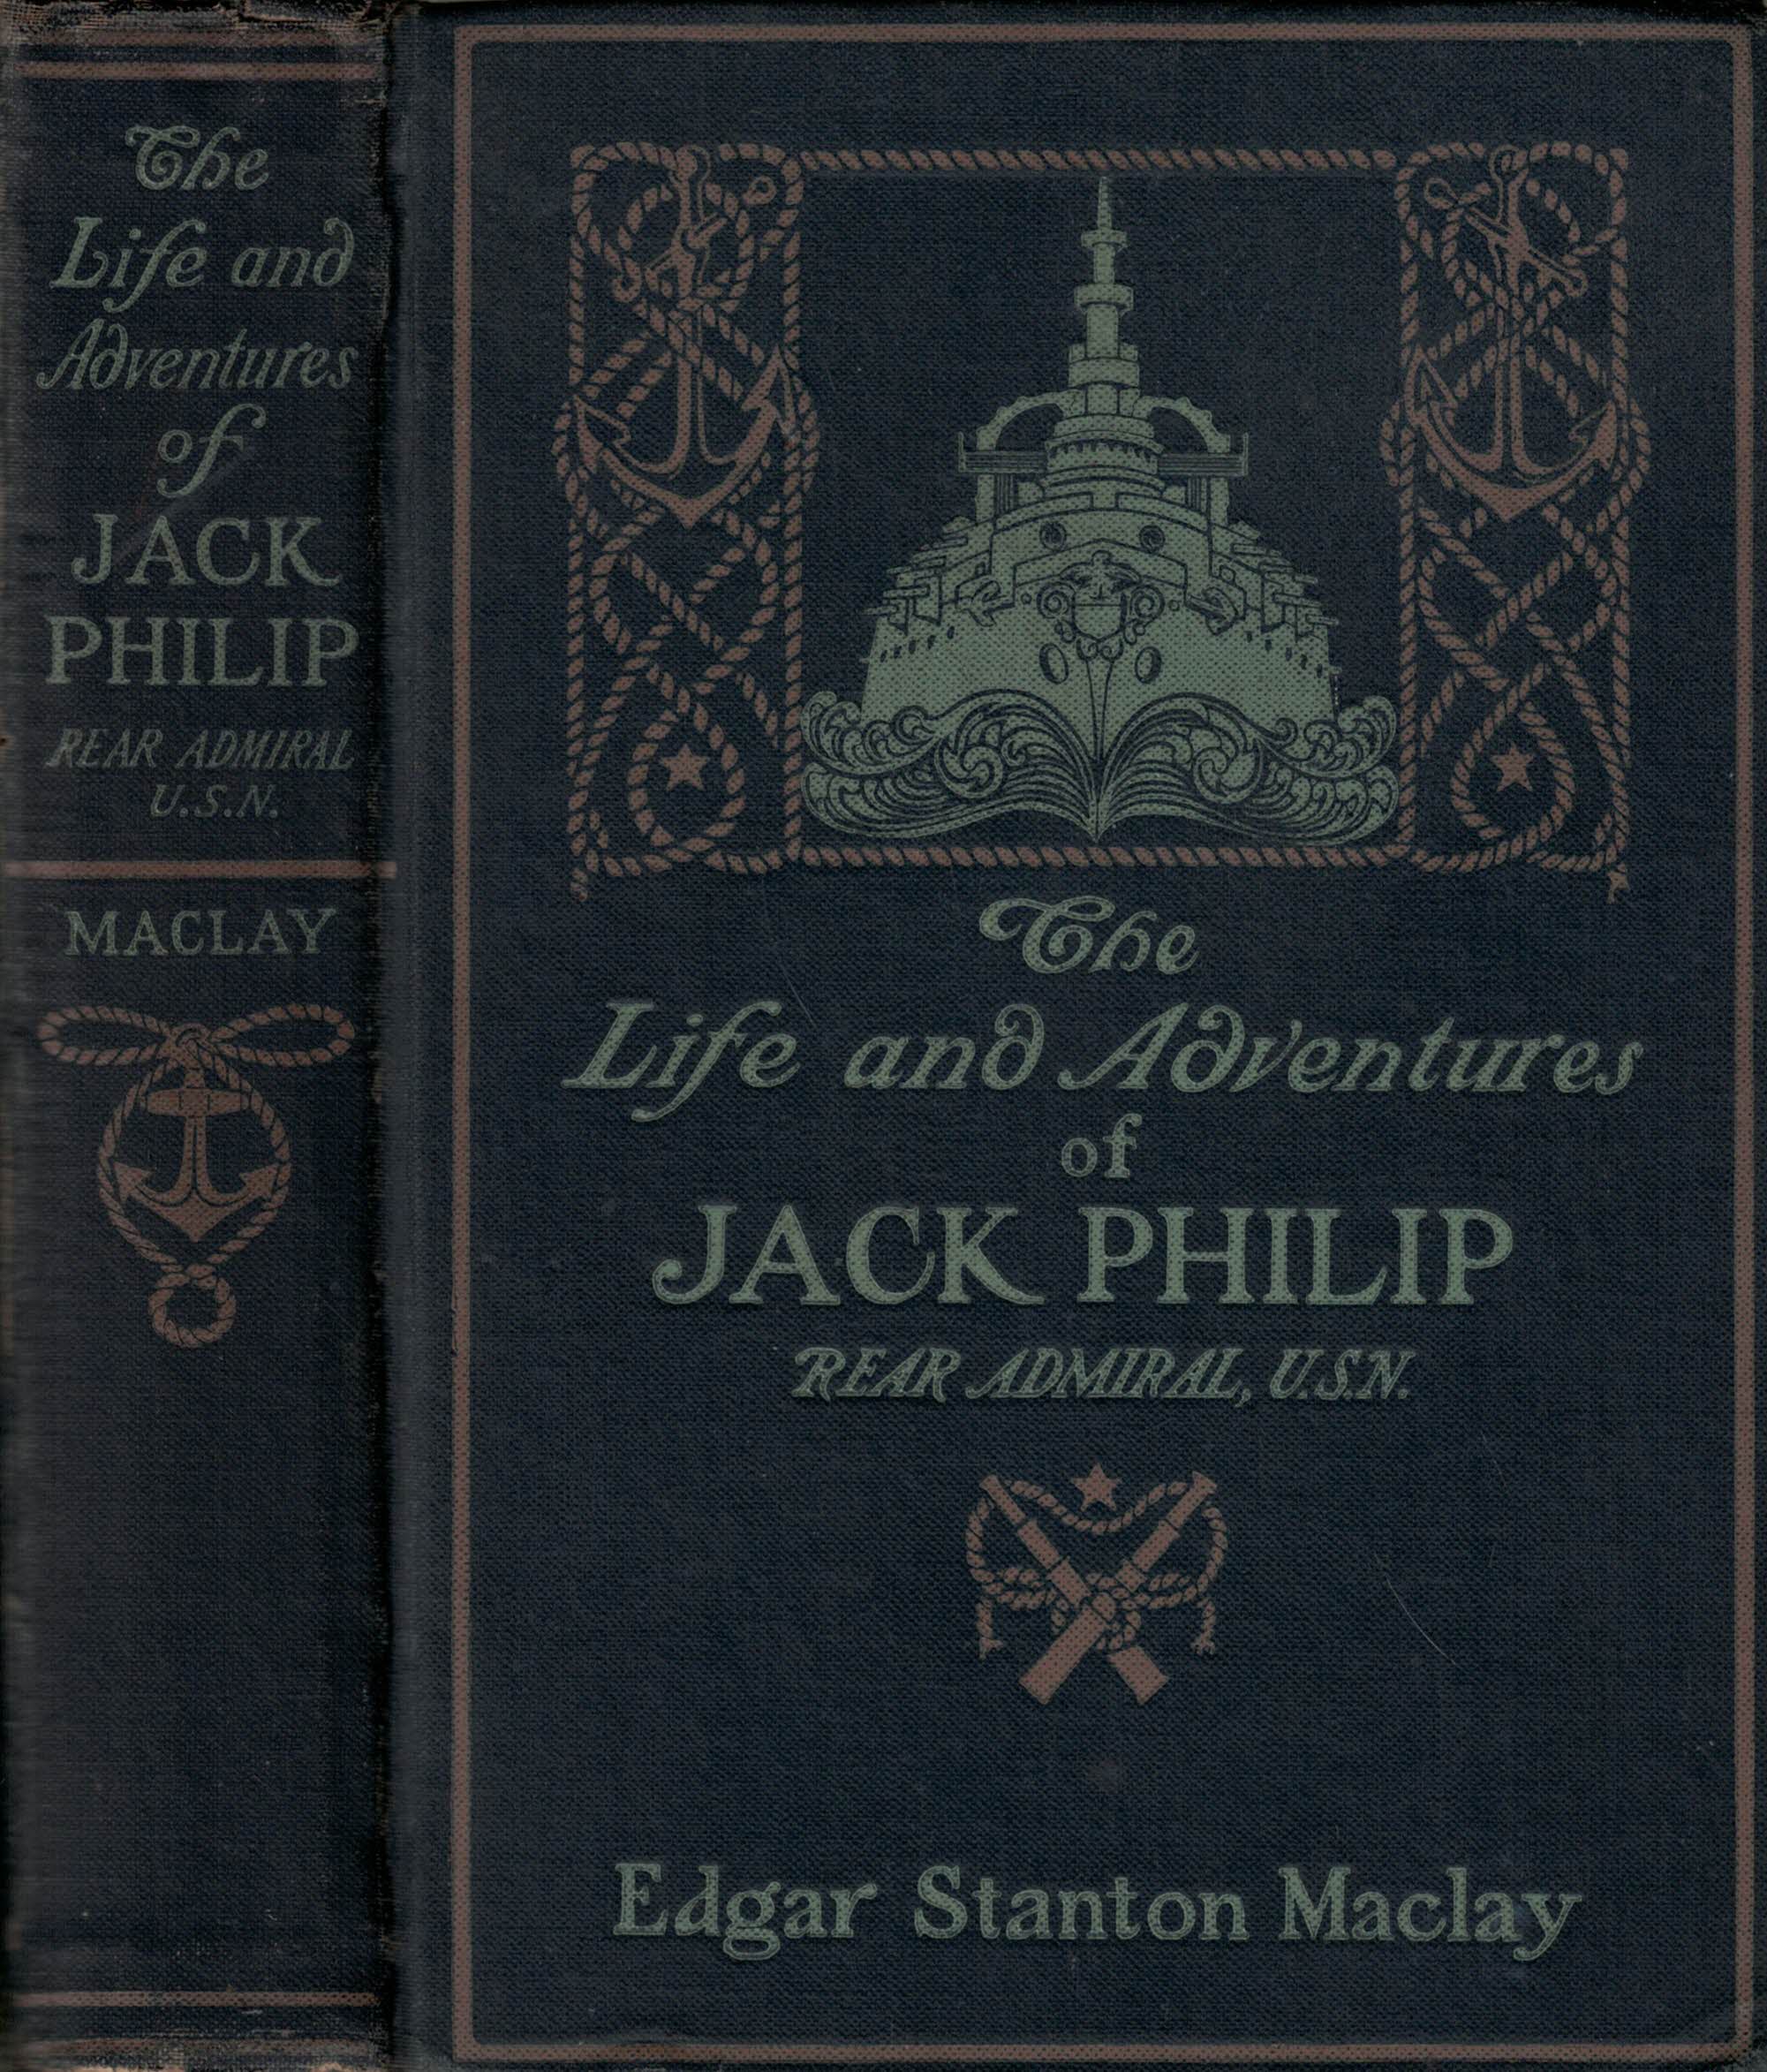 The Life and Adventures of Jack Philip, Rear Admiral U.S.N.